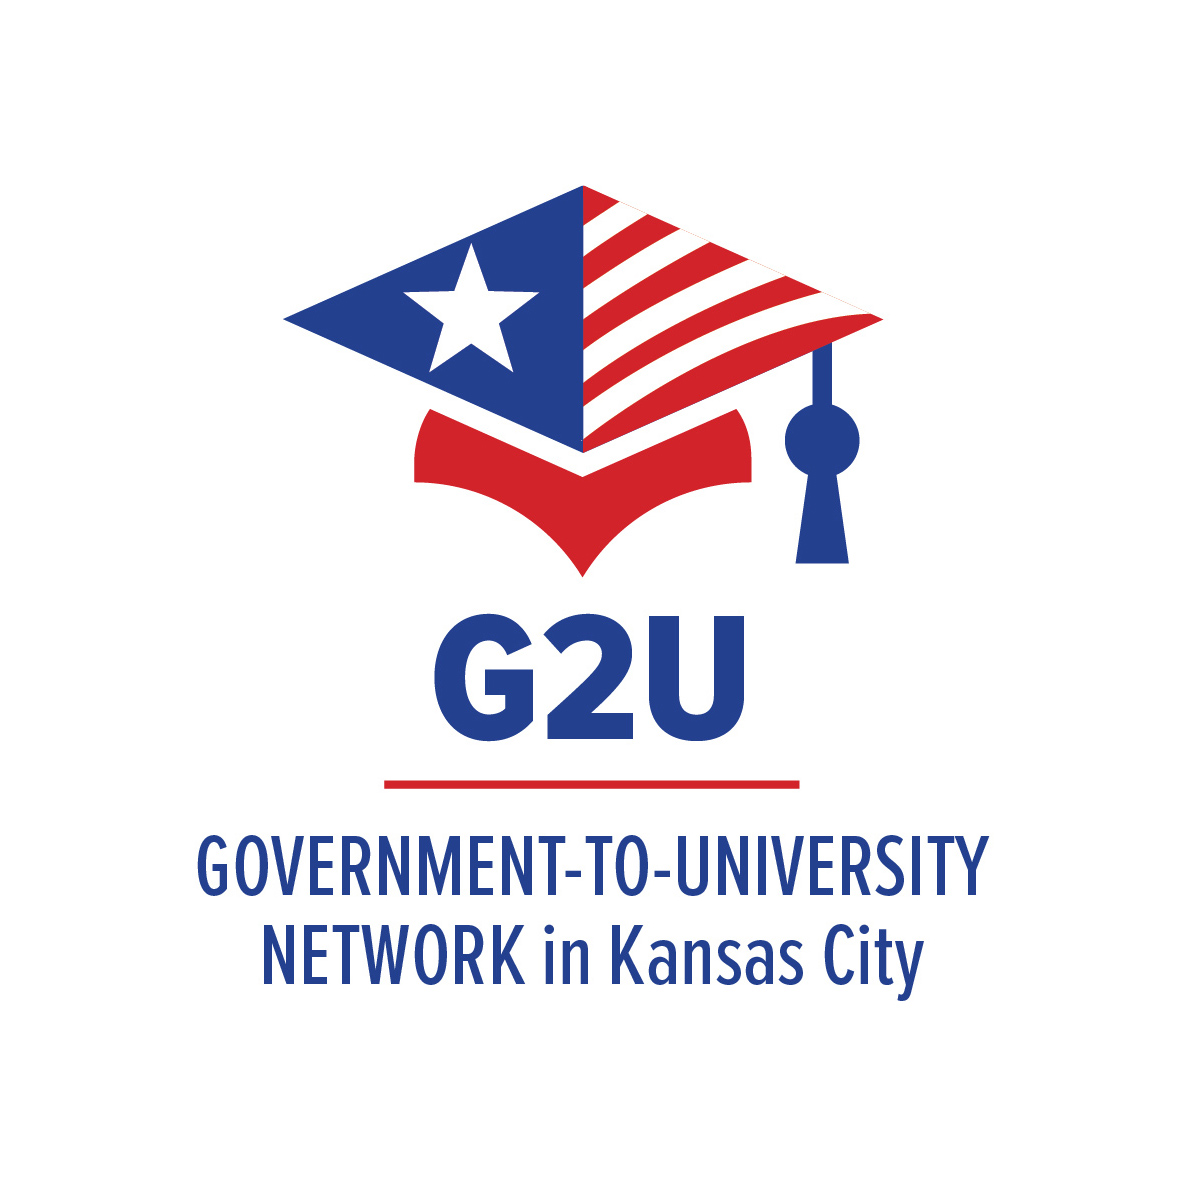 Government-to-University Network logo